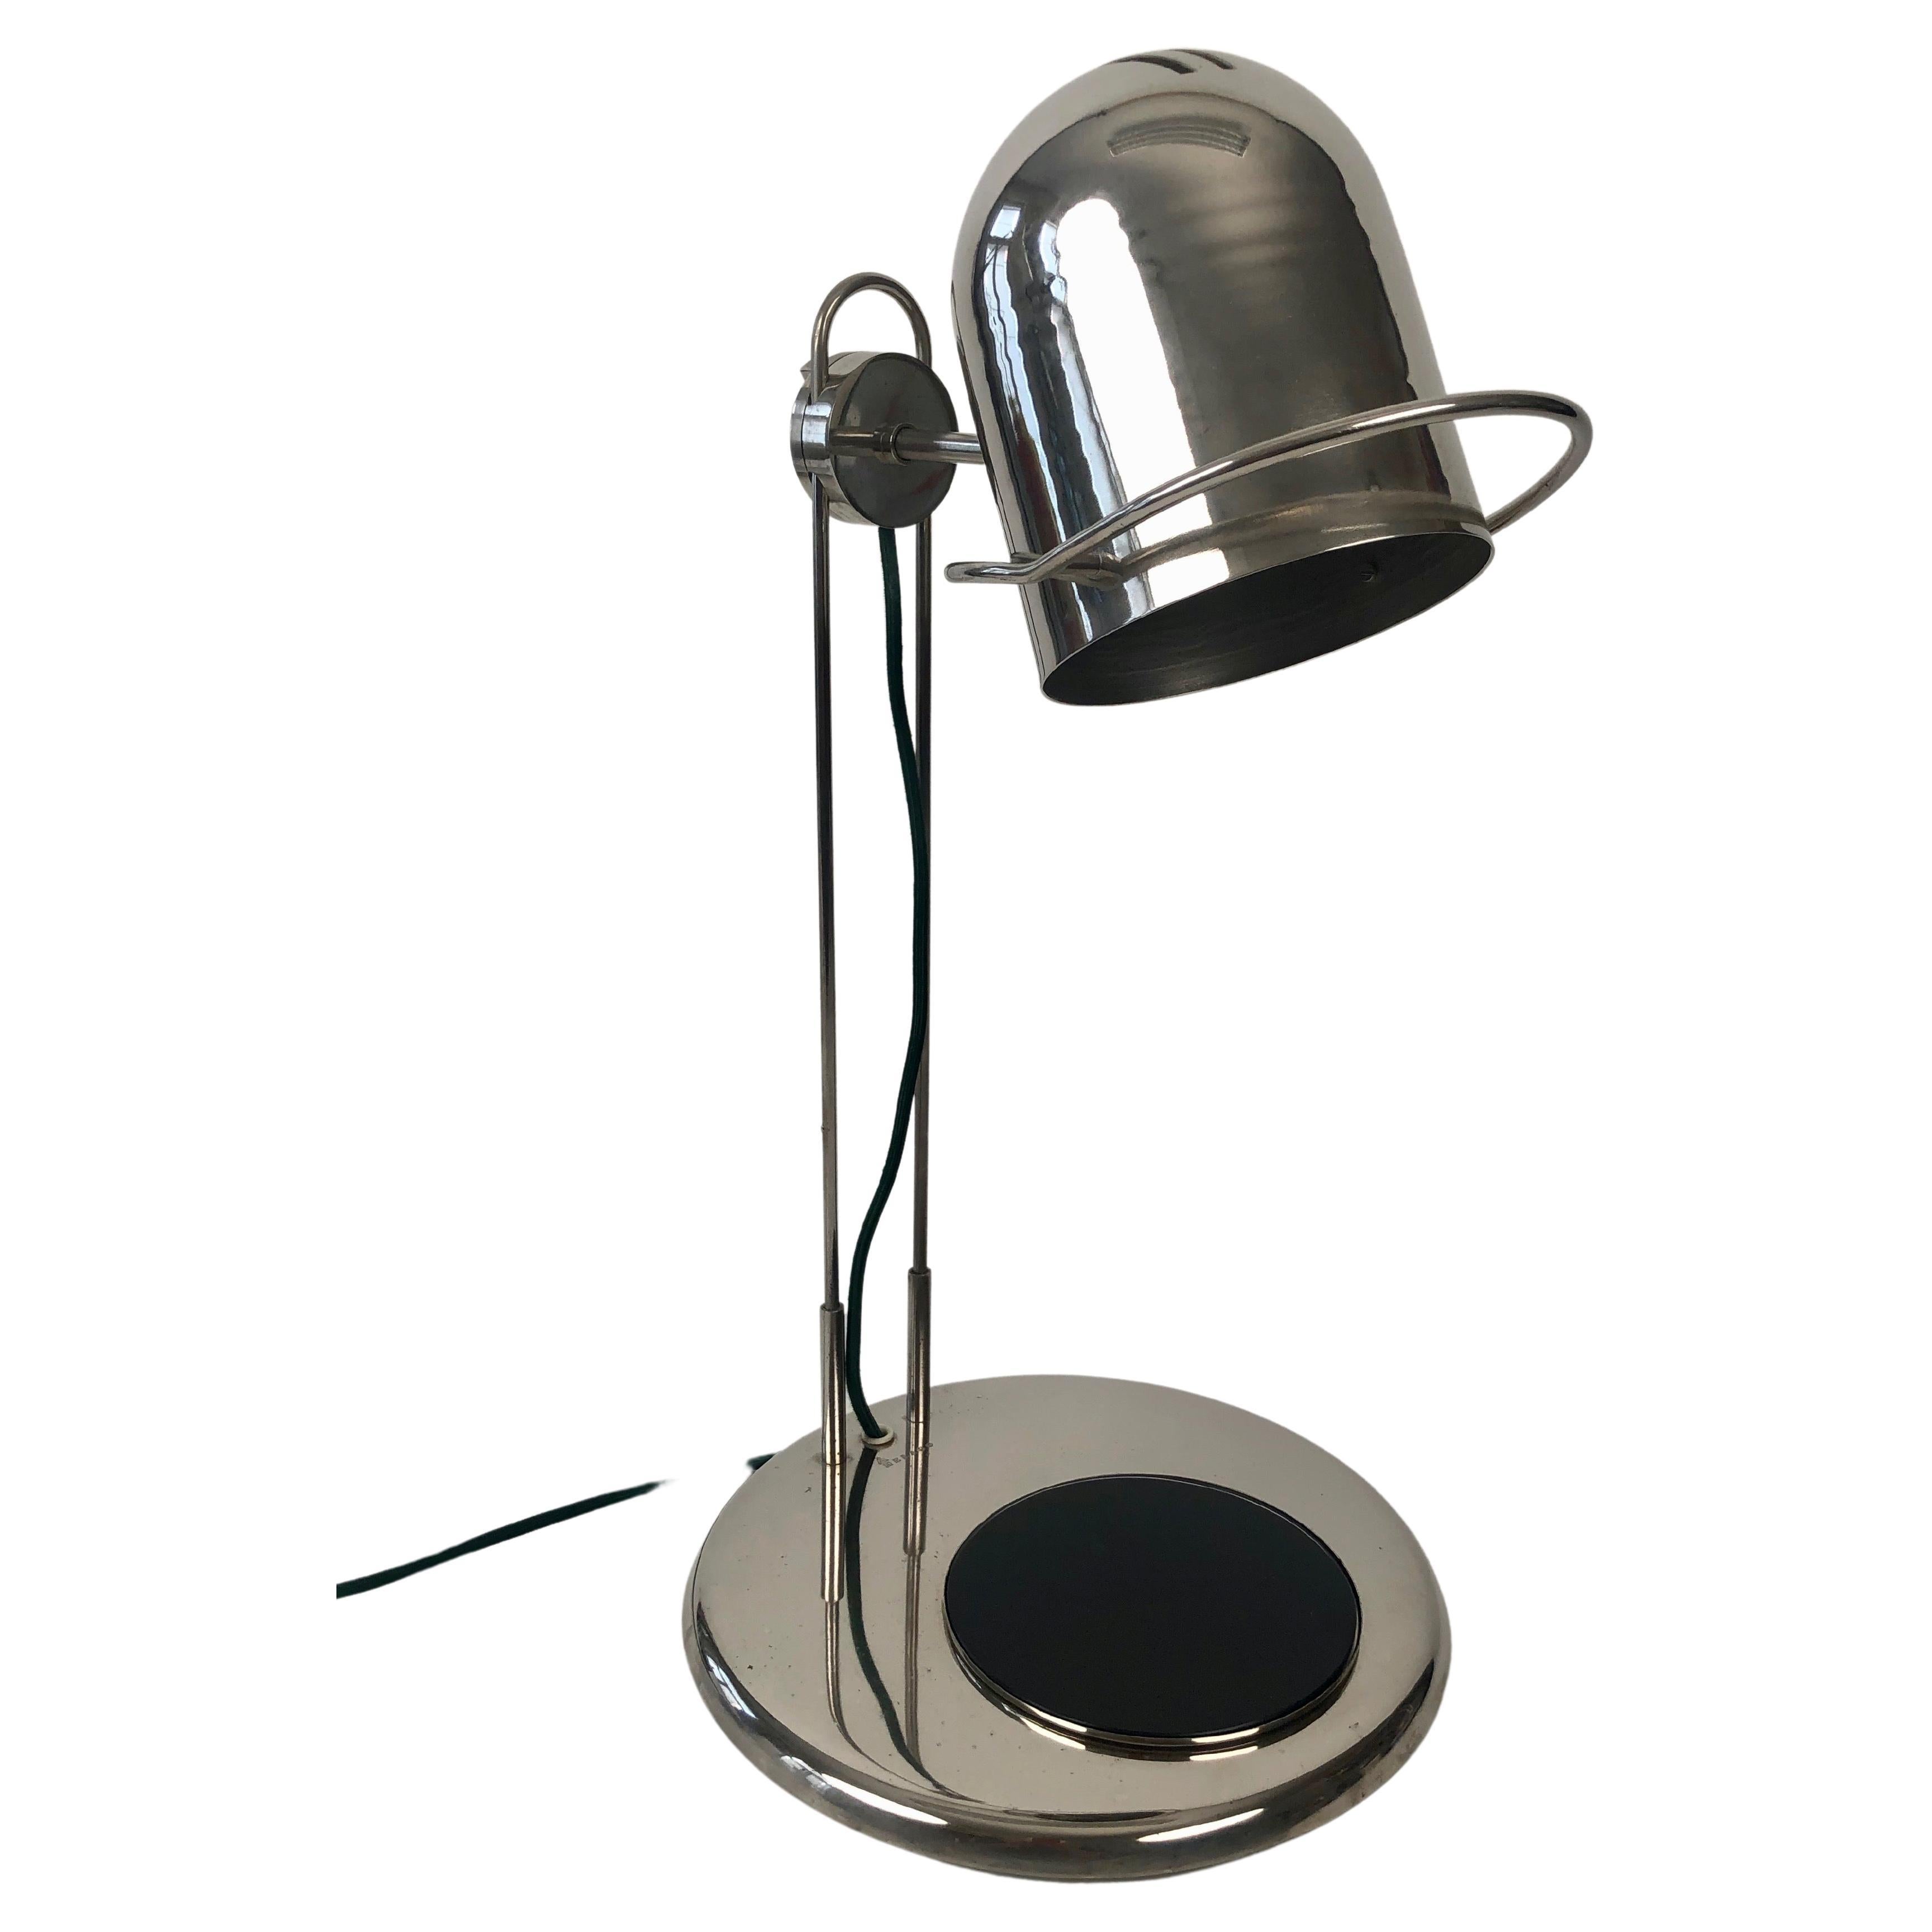 1970's, Chrome, Industrial Table Lamp from Helago, Czech Republic